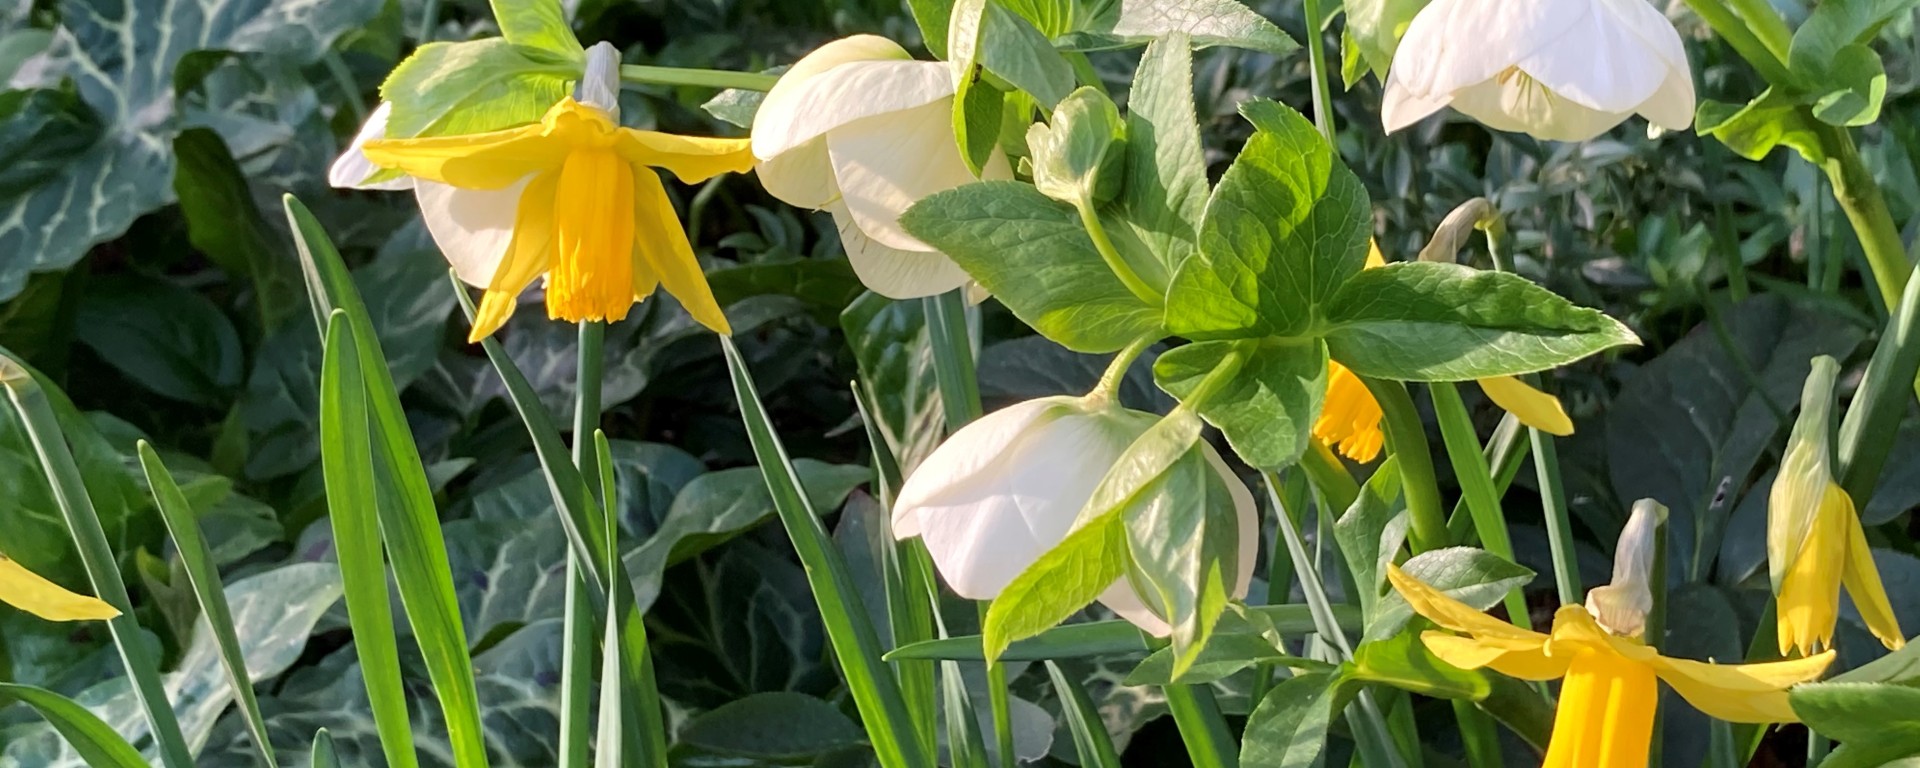 Daffodils and helebores in the Botanic Garden